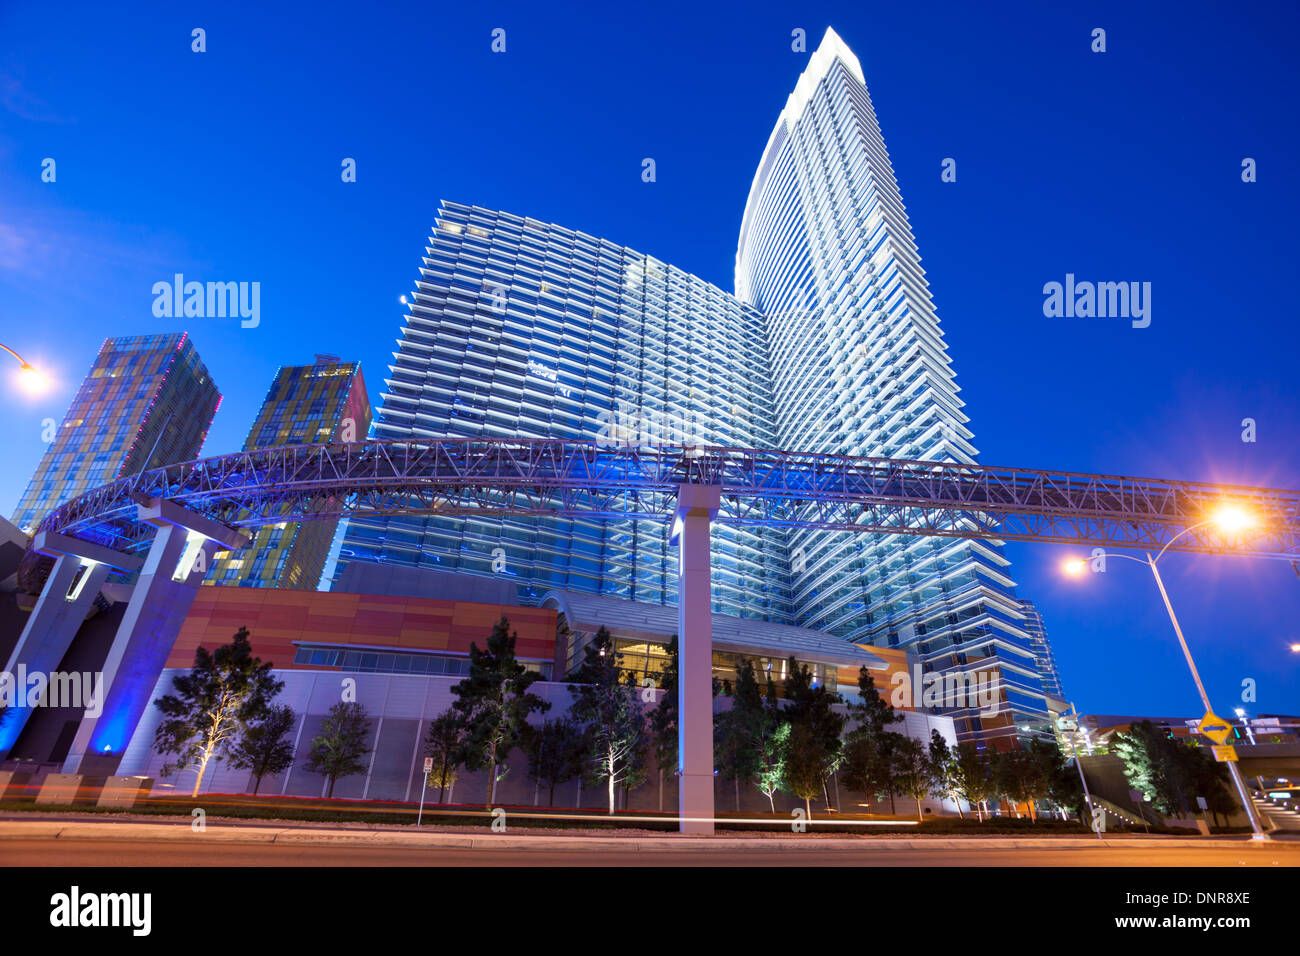 Night time / evening shot of the tram / monorail connecting the Aria hotel & casino in Las Vegas with the Crystals shopping mall Stock Photo